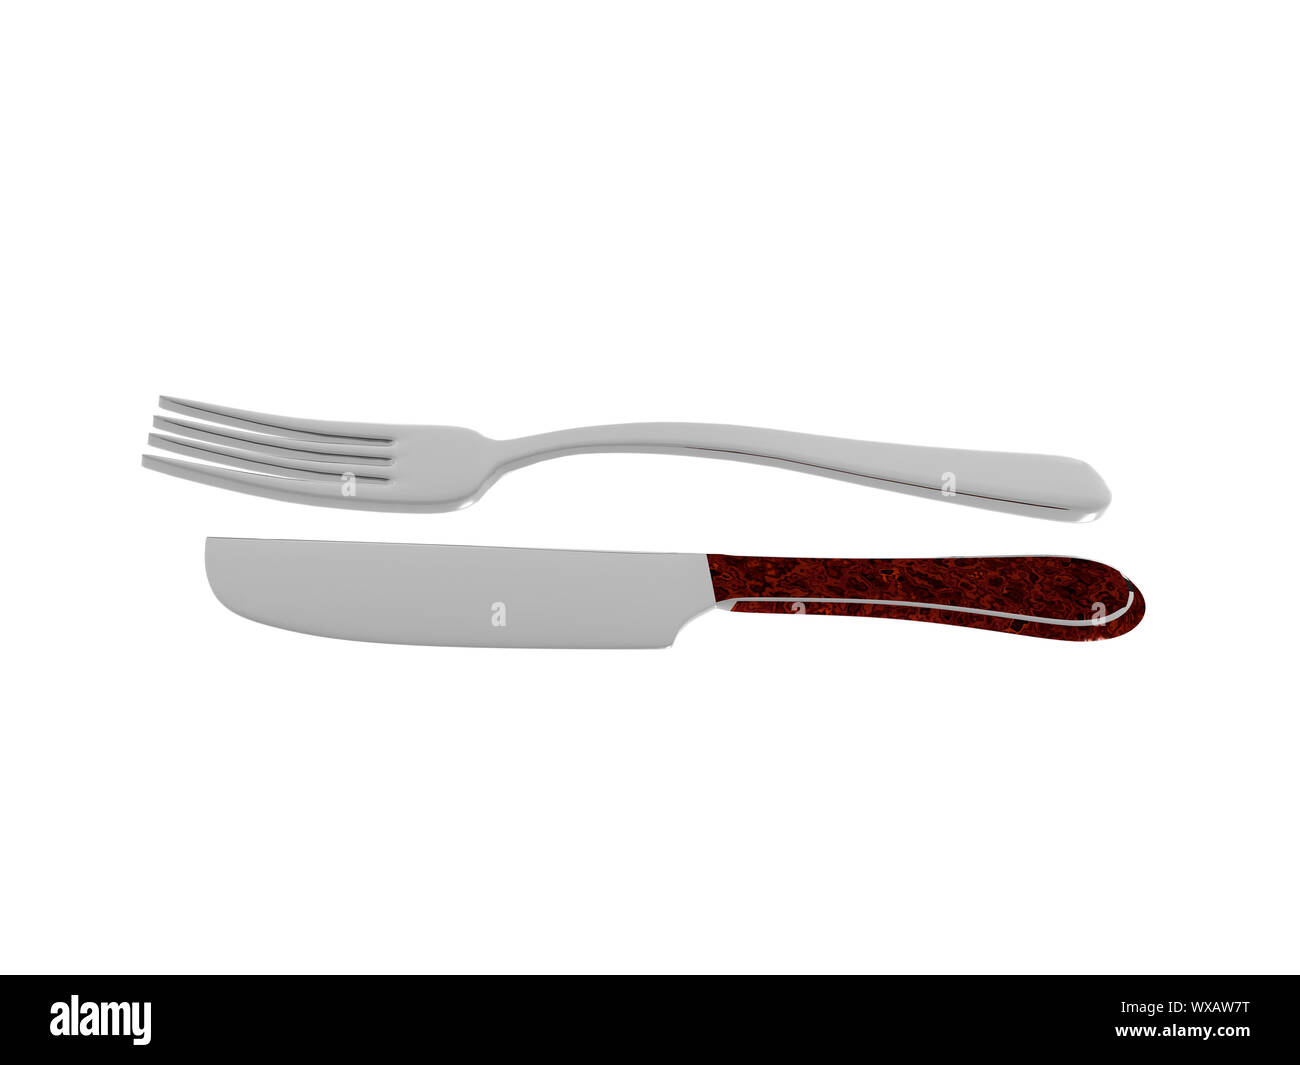 Cutlery from knife and fork 3D rendering Stock Photo